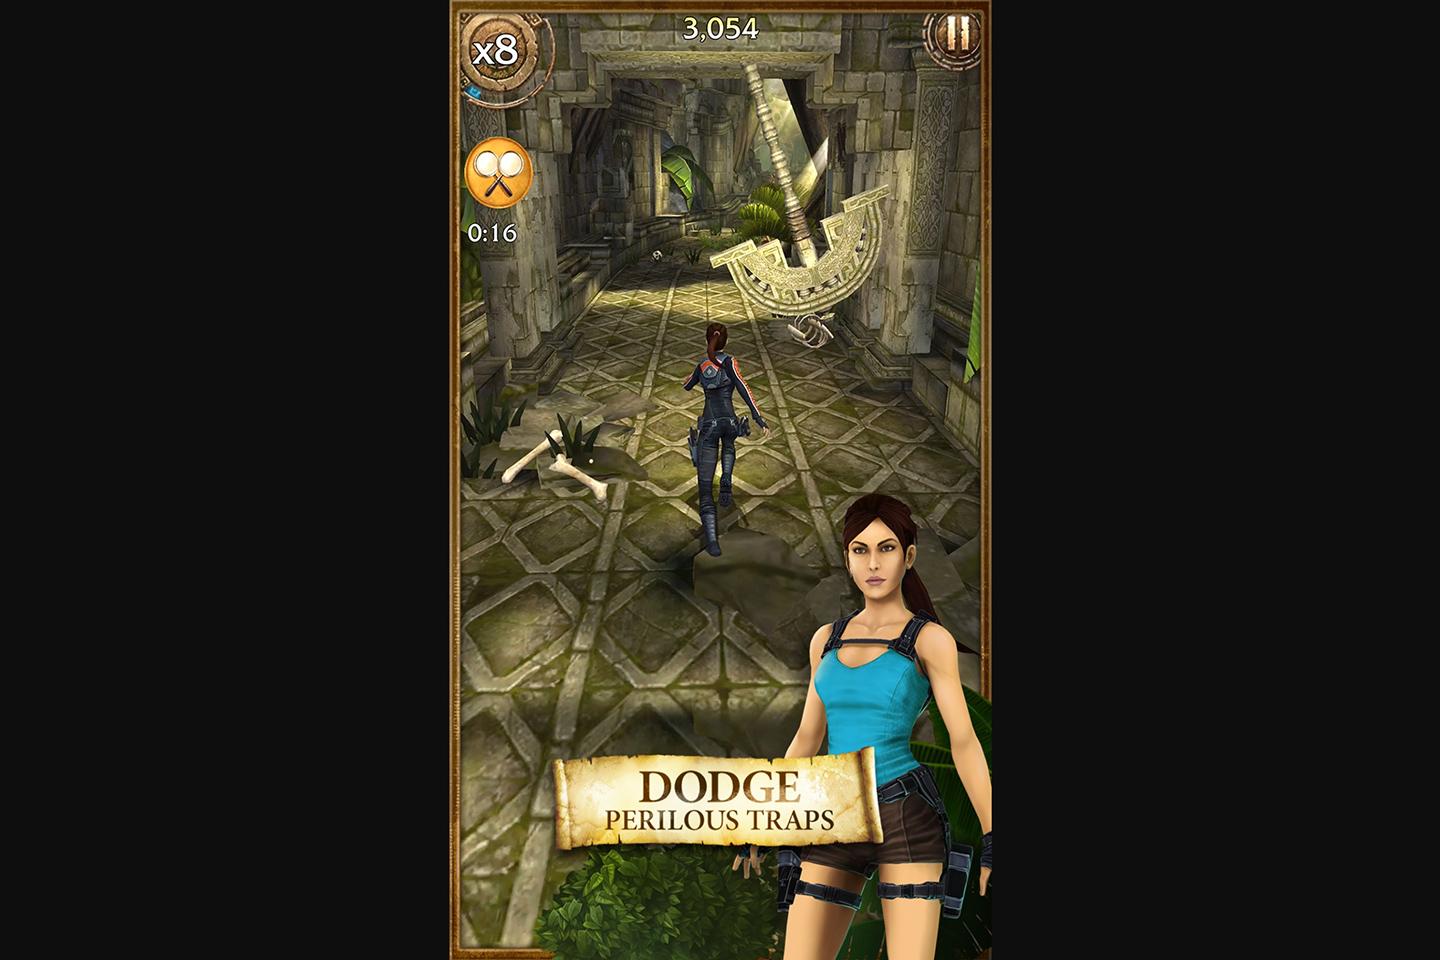 A mobile game screenshot showing Lara Croft in a temple corridor, with a 'Dodge Perilous Traps' caption, as she prepares to evade a giant dinosaur skeleton.